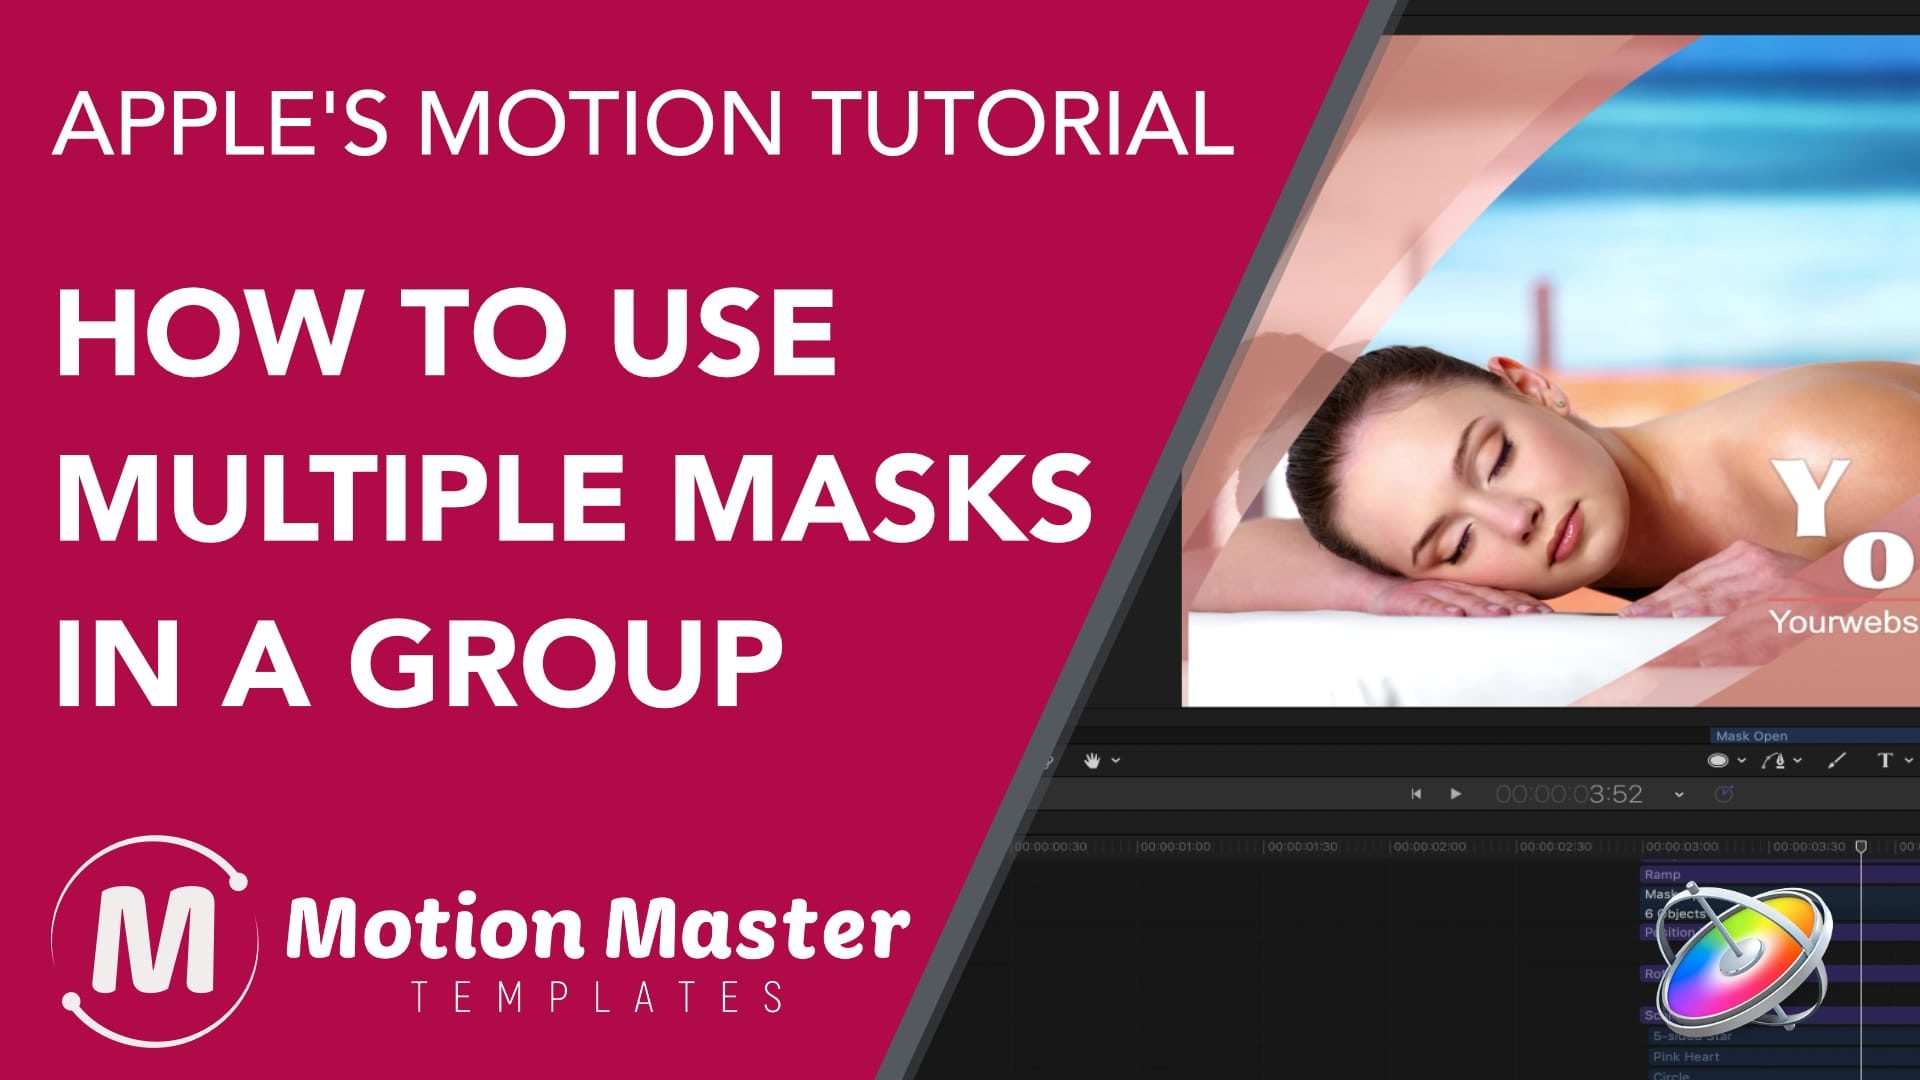 Video Thumbnail 1 | Motion Master Templates | How to Use Multiple Masks in a group inside Apple's Motion | Animation Templates for Apple’s Final Cut & Motion Software